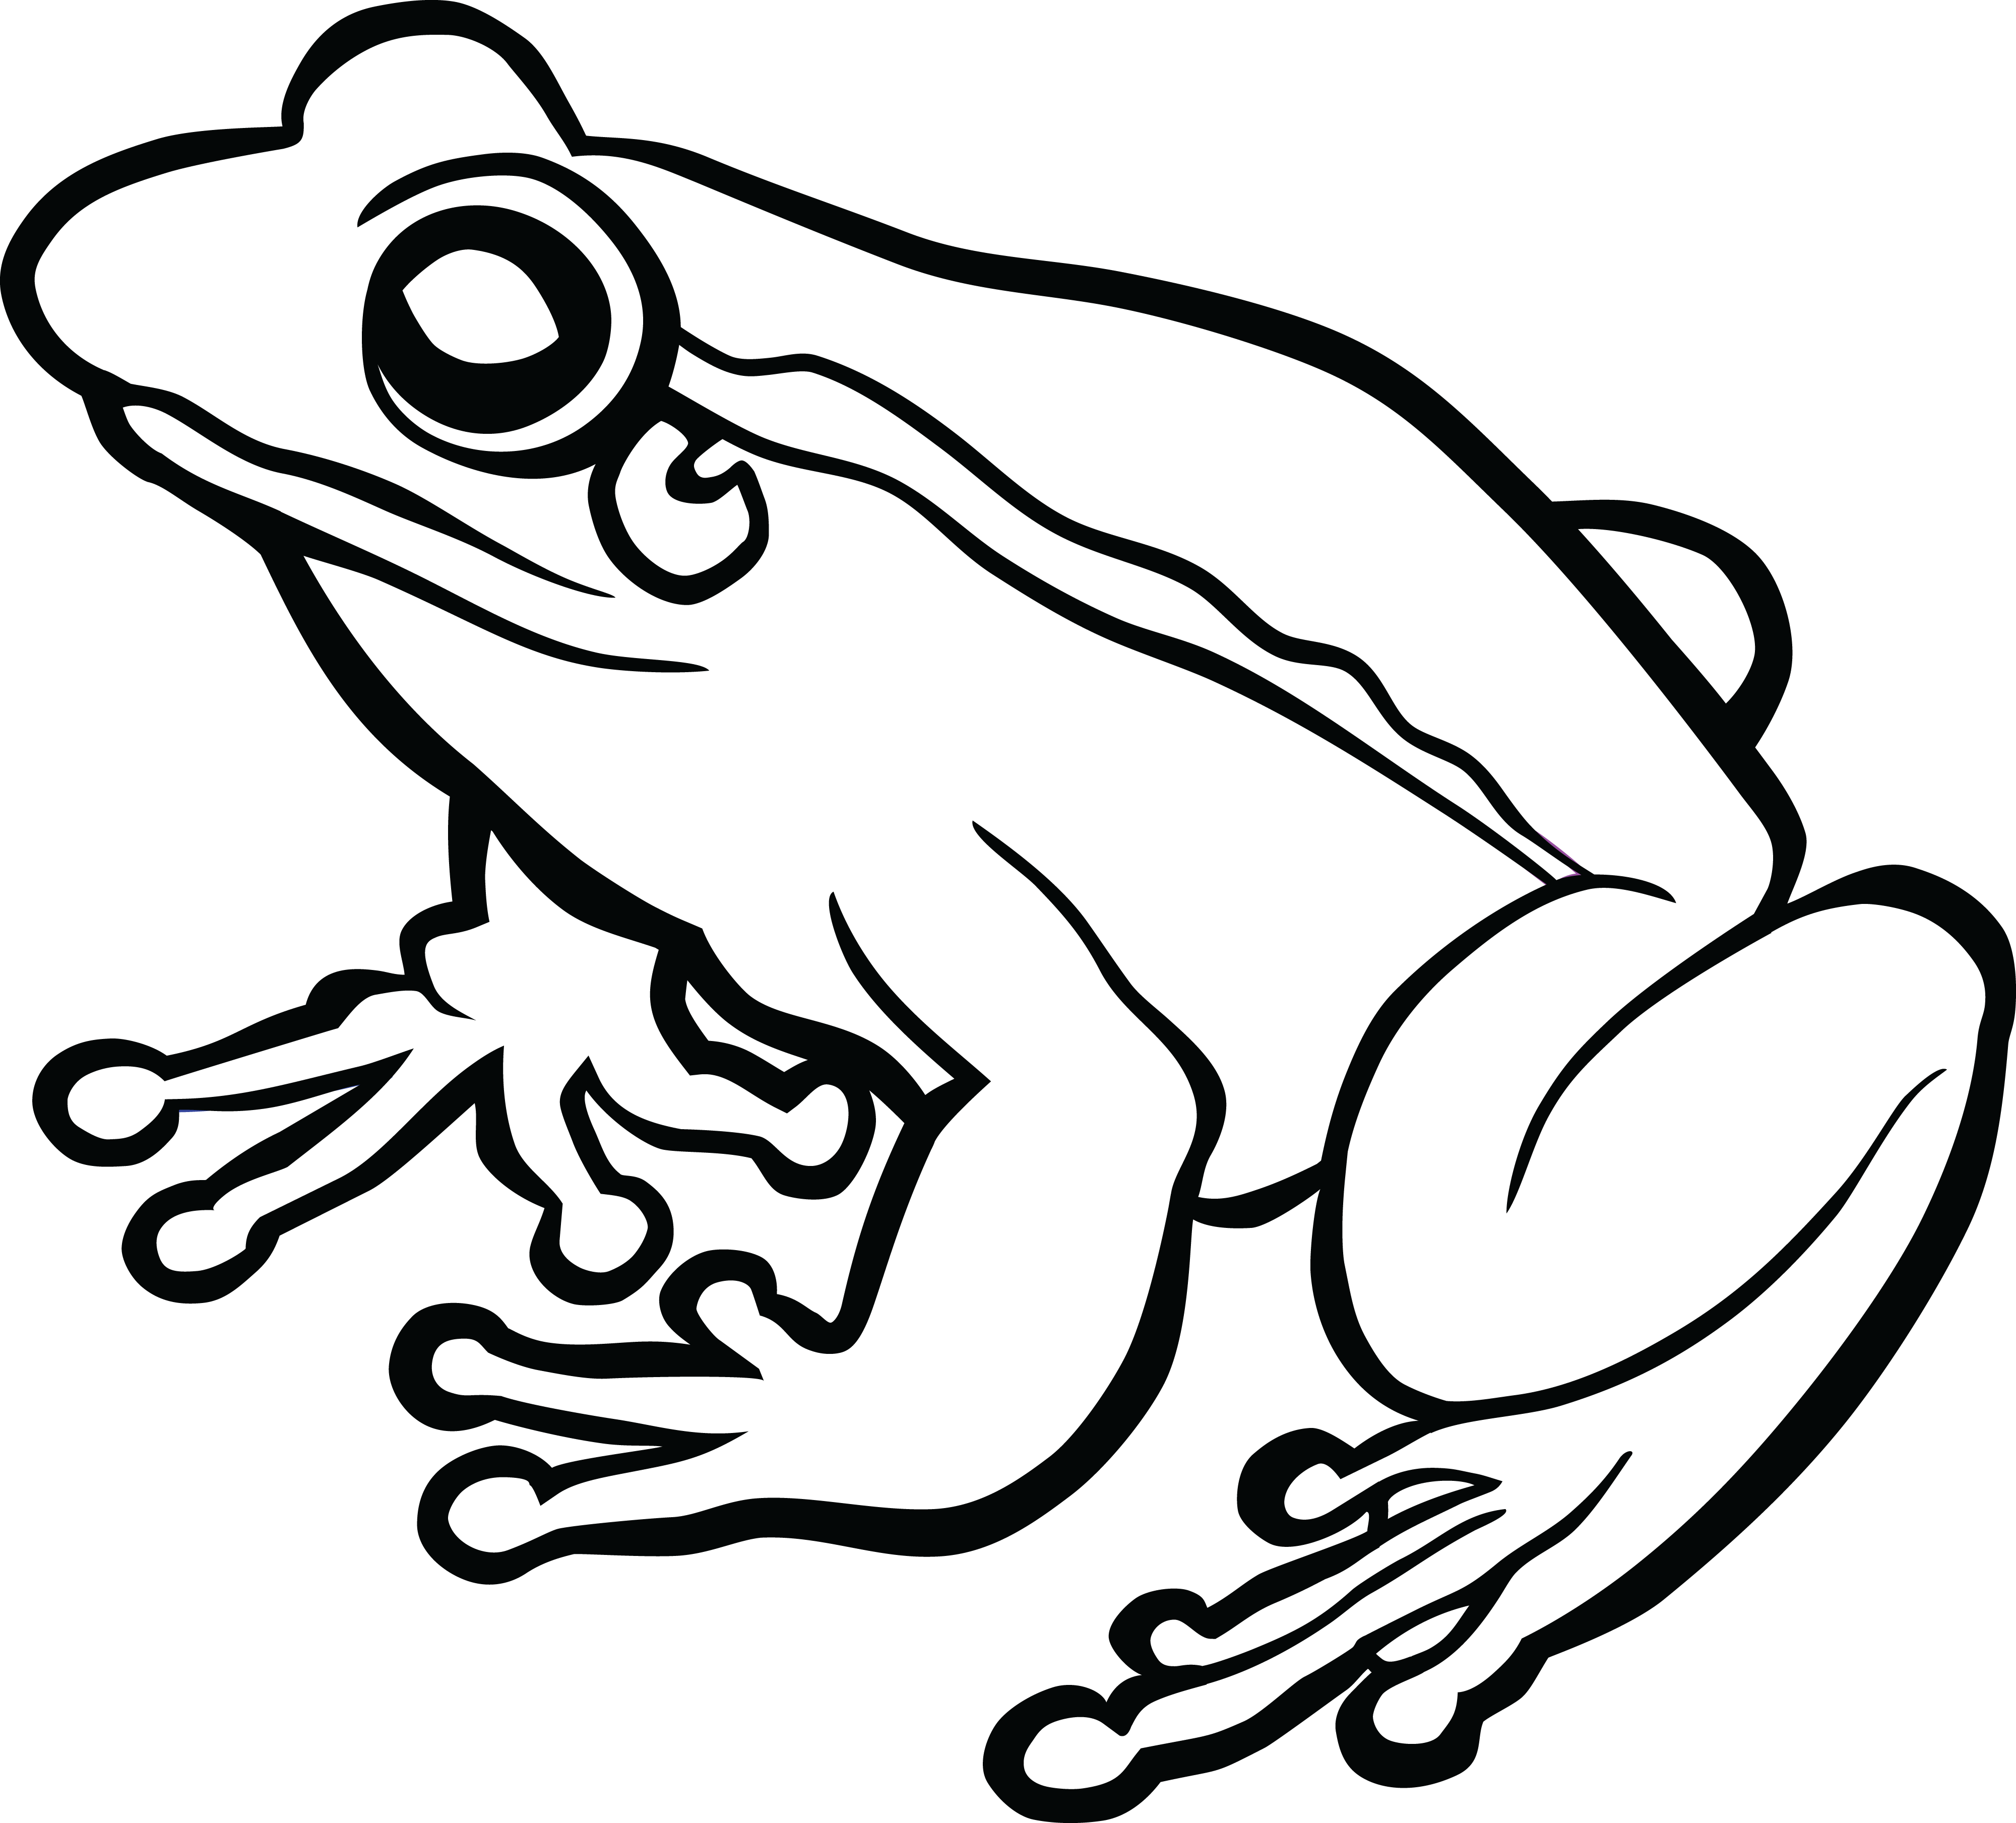 Frog Black and white Drawing 